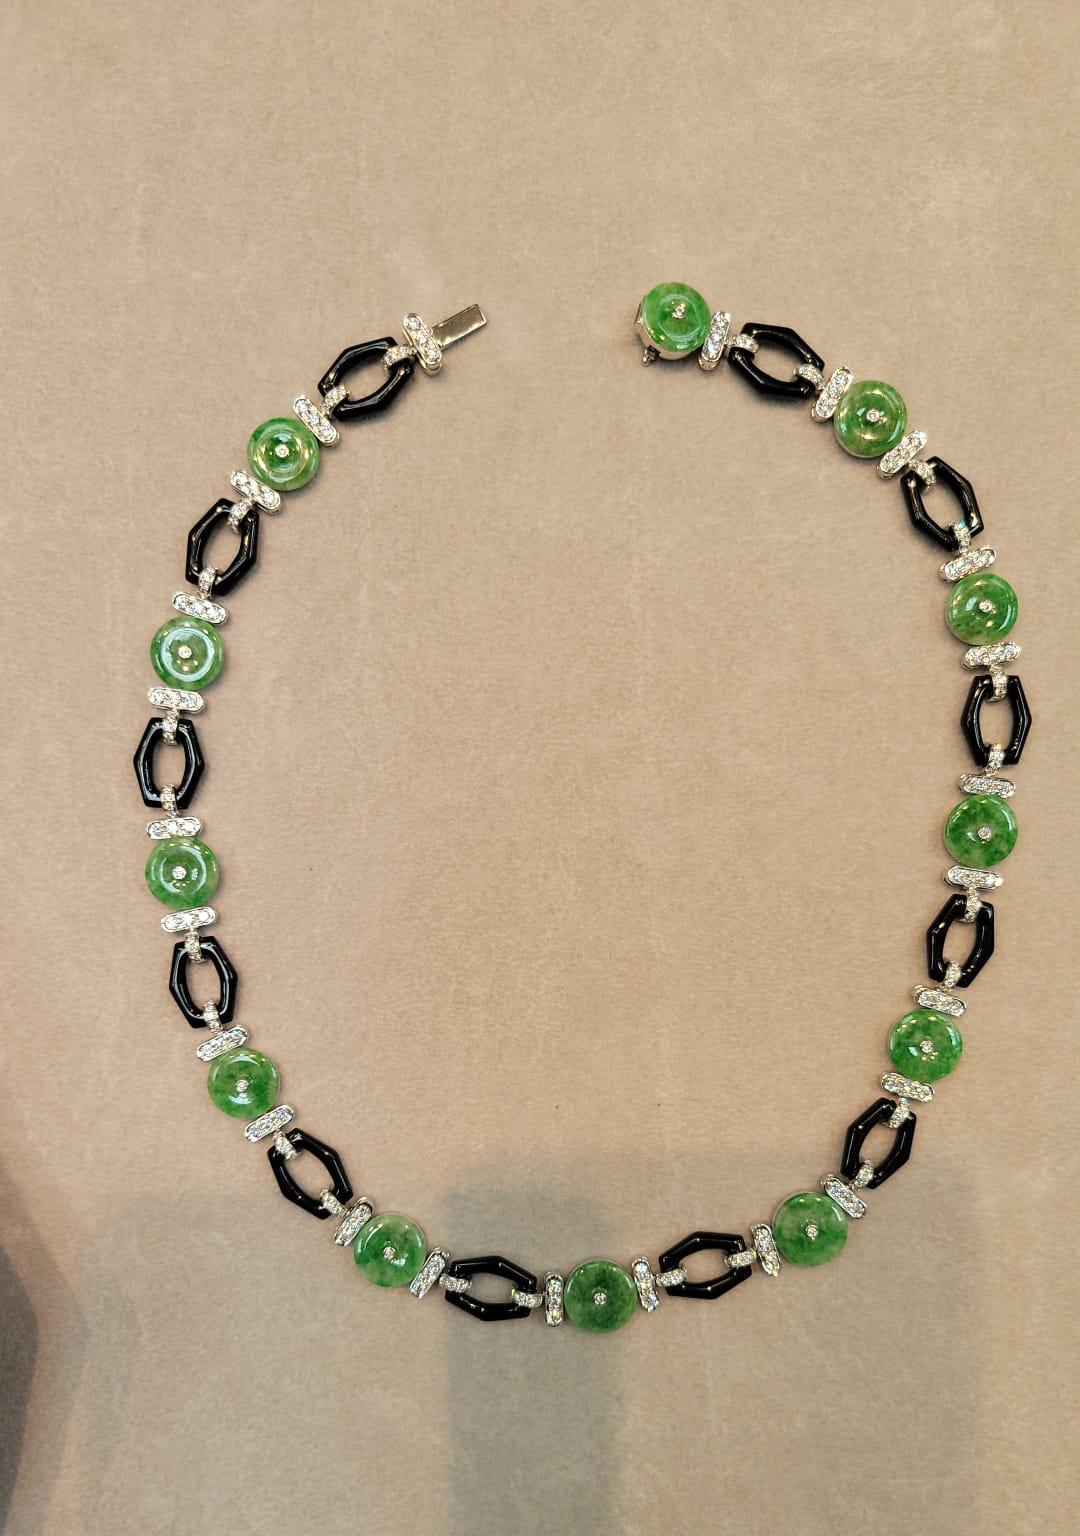 The Following Item we are offering is a Rare Magnificent Radiant 18KT Gold Large Rare Gorgeous Fancy Burmese Jade Diamond Necklace. Necklace is comprised of Beautiful Rare Burmese Jade and Glittering Diamonds and Black Onyx. T.C.W. Approx 225CTS of